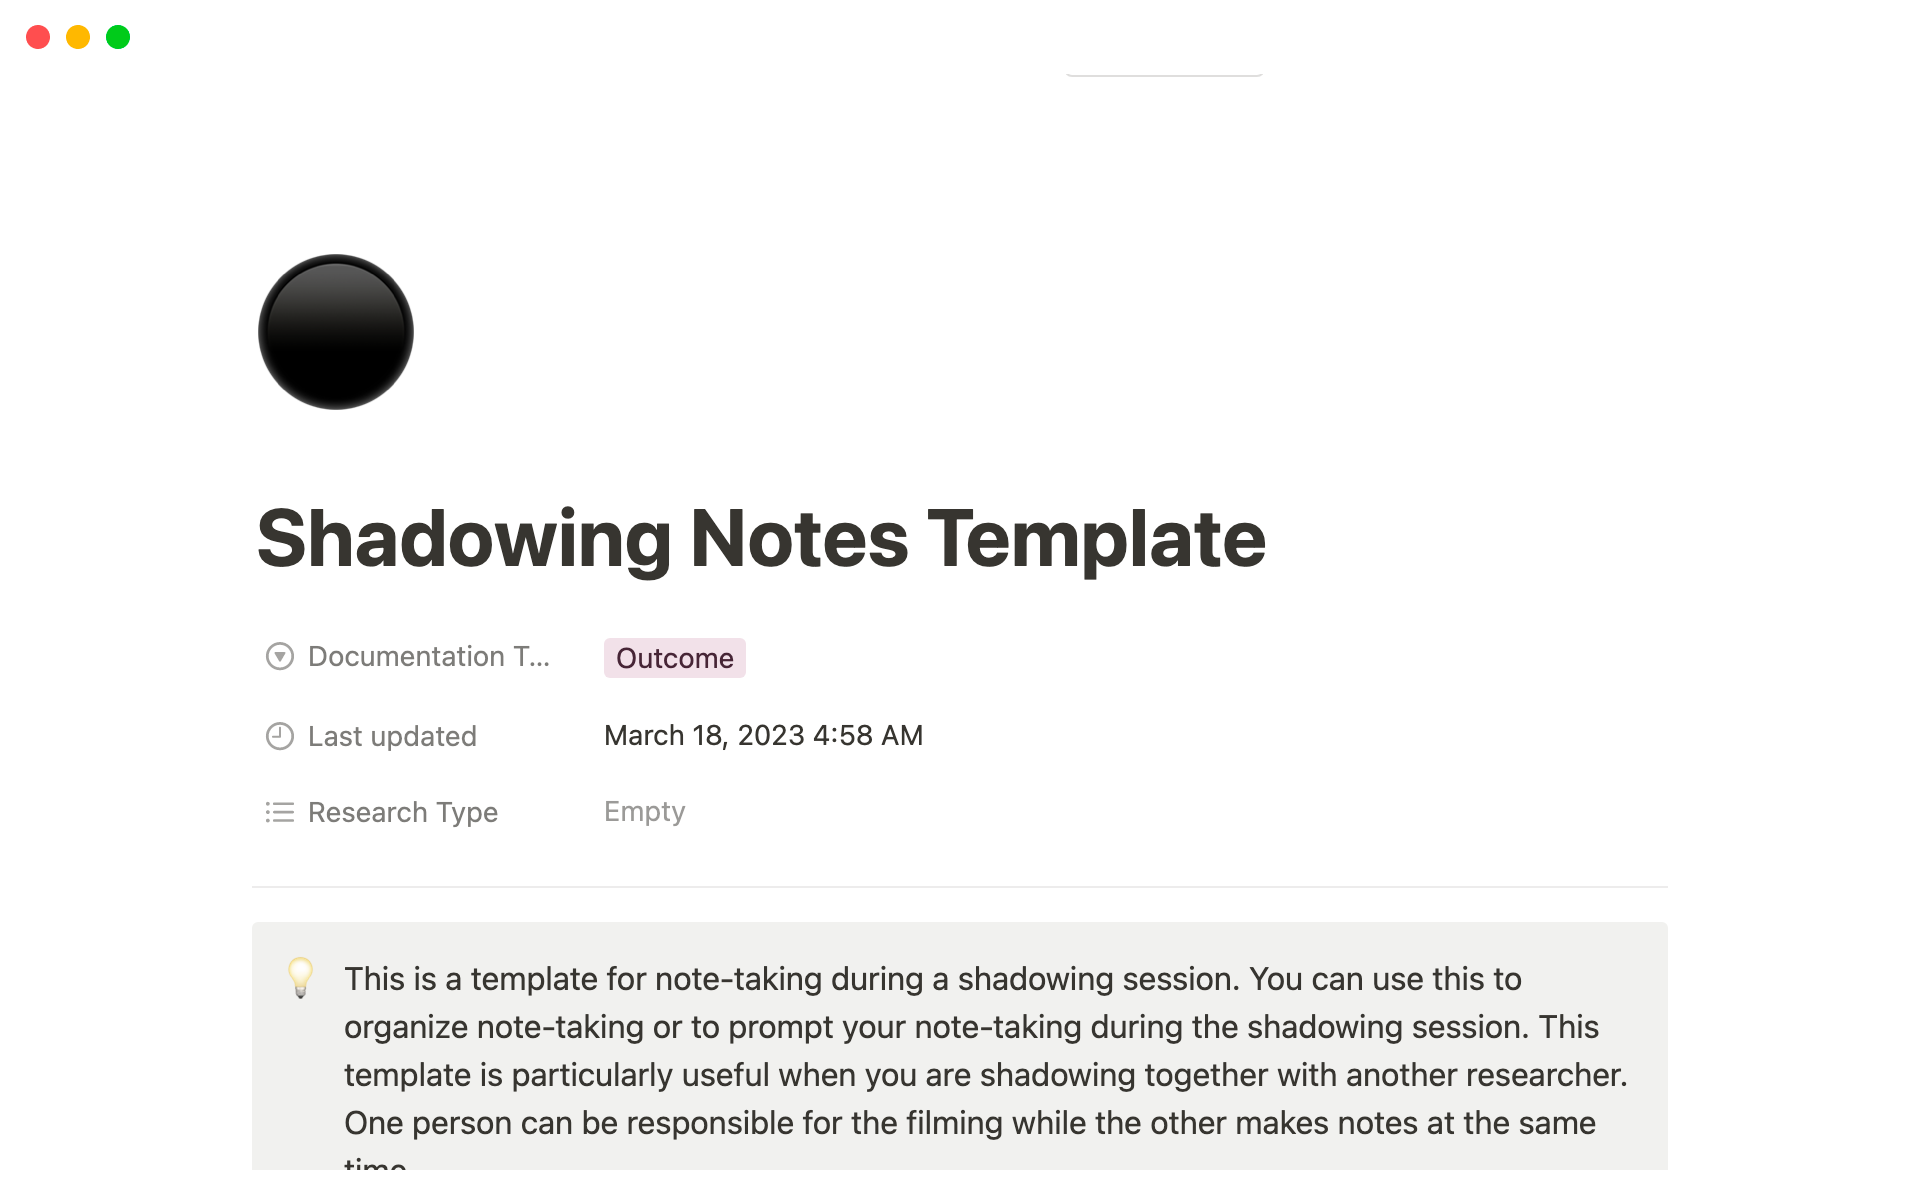 This template provides UX Researchers with a way to improve their note-taking during shadowing sessions as part of a research project